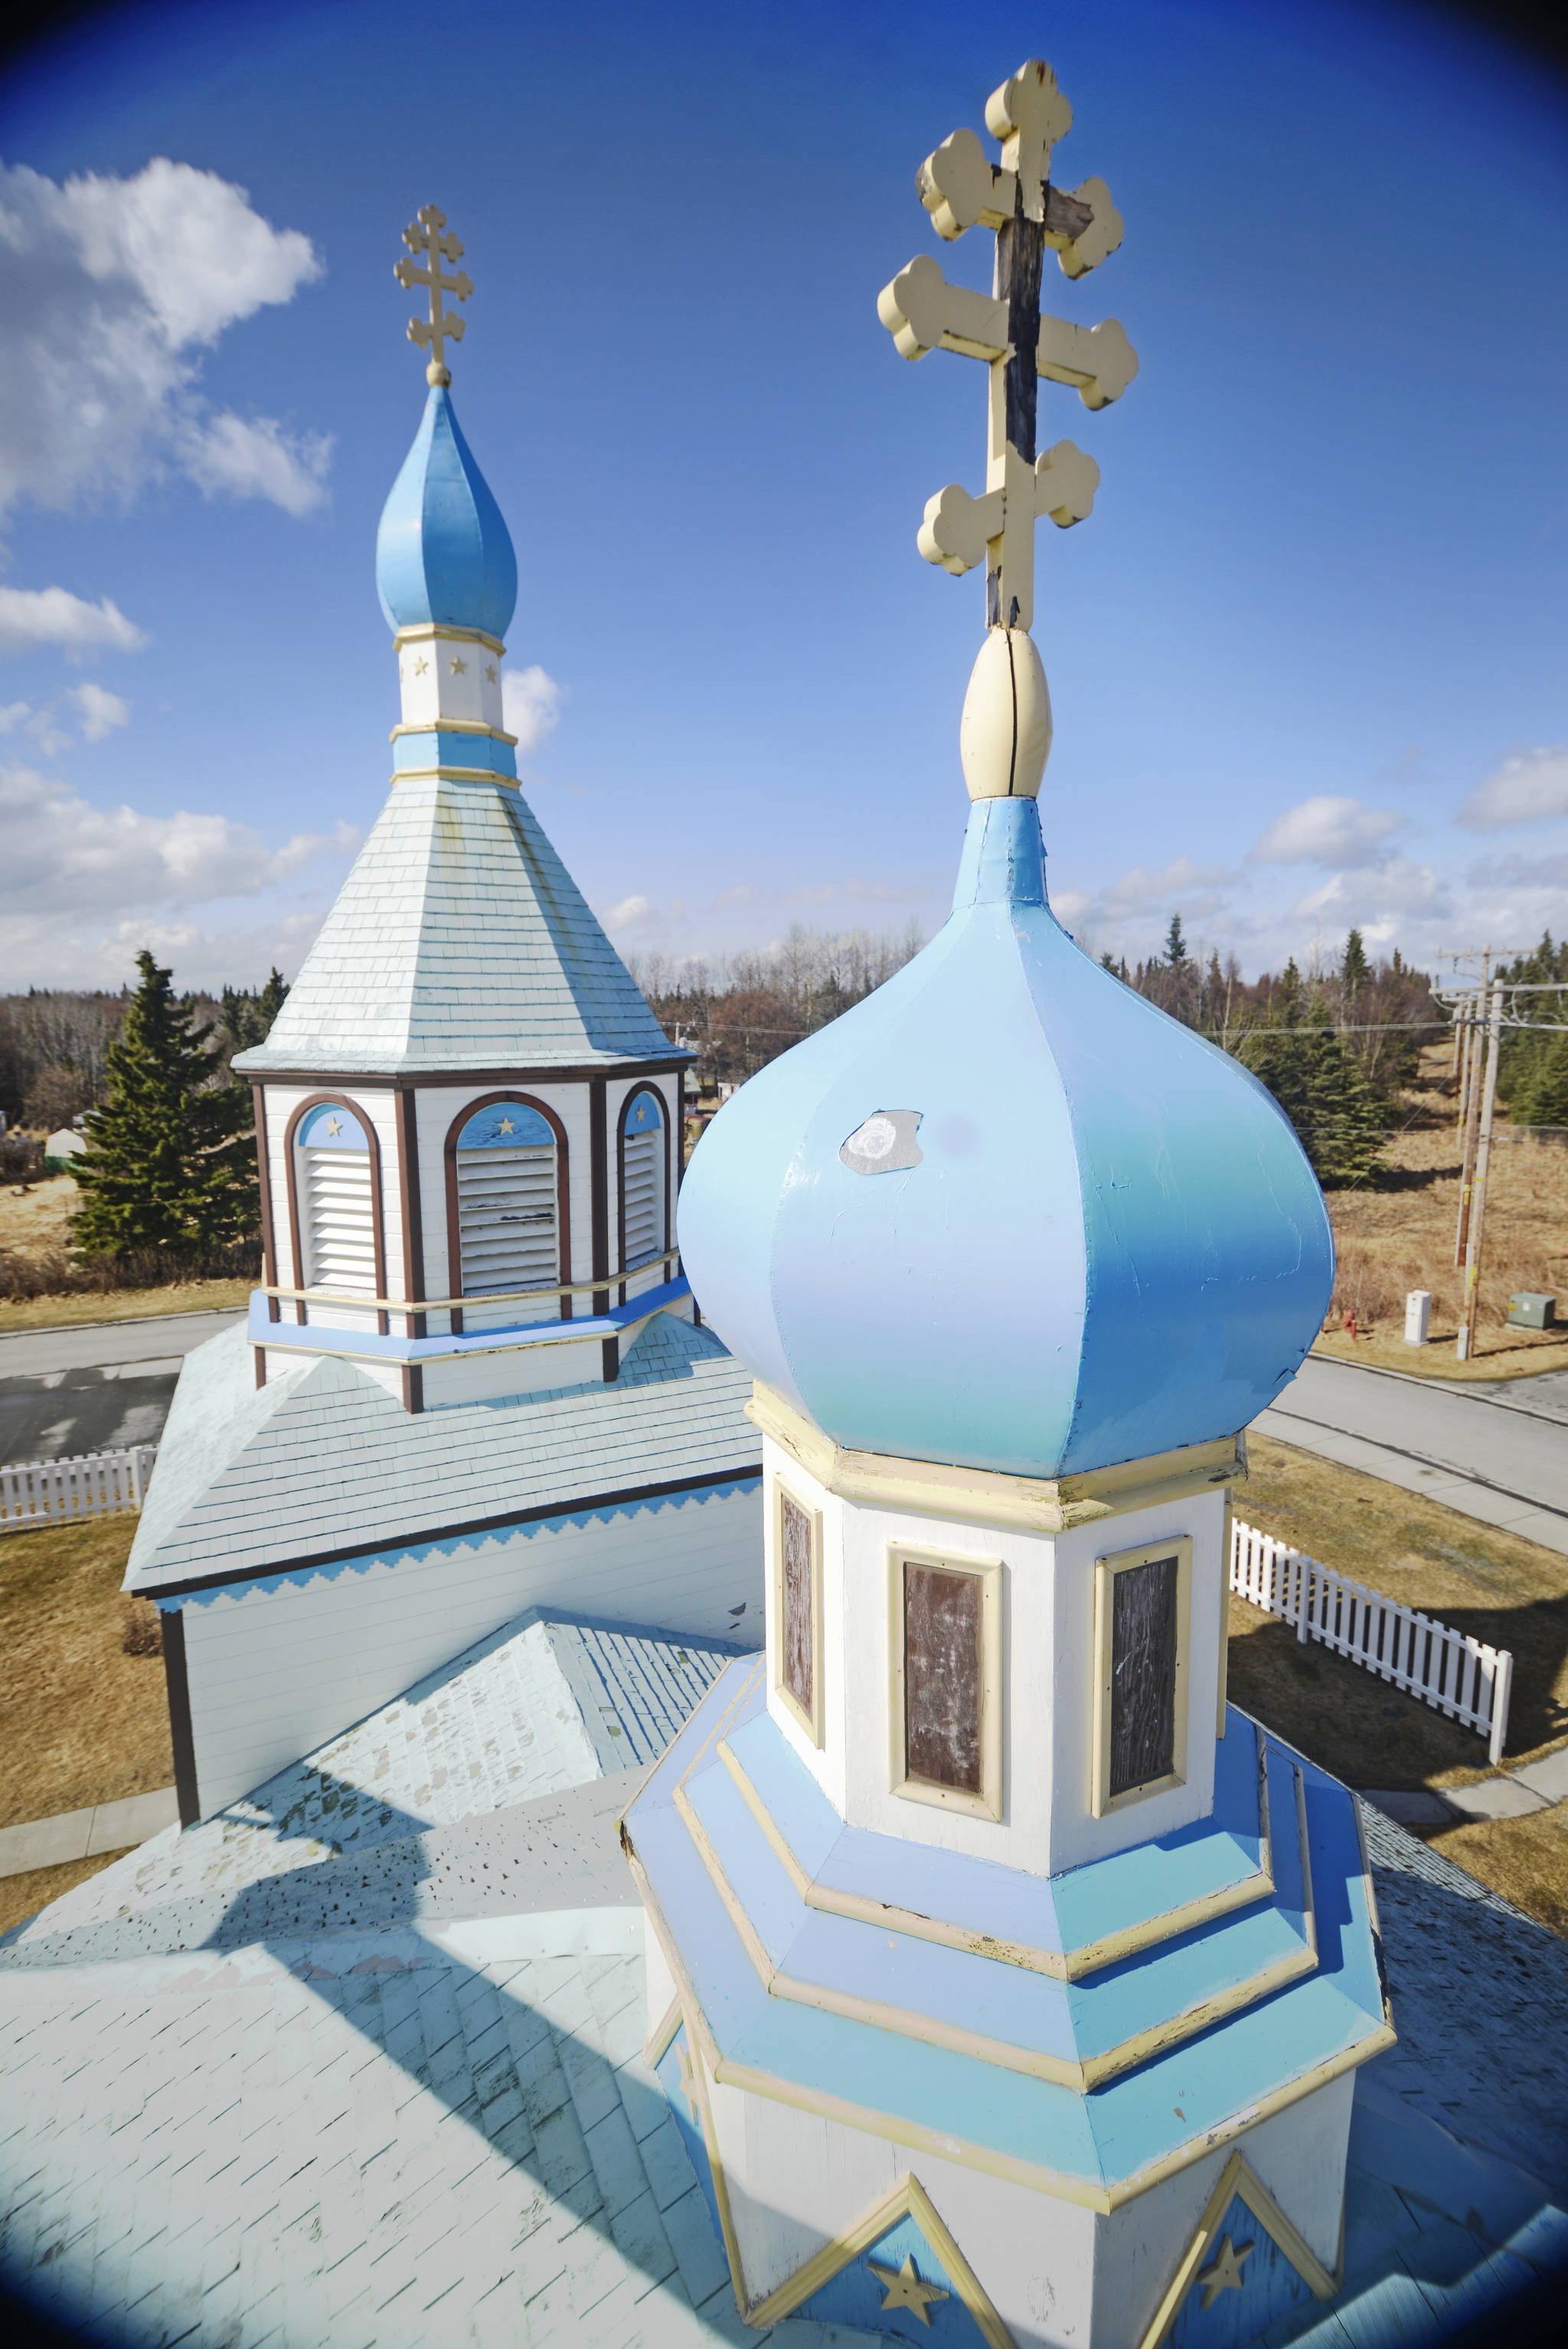 Shortly before its removal, an aged and weathered cross tops an onion dome of the Holy Assumption of the Virgin Mary Russian Orthodox Church on Friday, May 4 in Kenai. Replacing the church’s shingle roof, which is original to its construction in 1896, is the next and final major project of Holy Assumption’s decade-long effort to restore the historic building. (Ben Boettger/Peninsula Clarion)